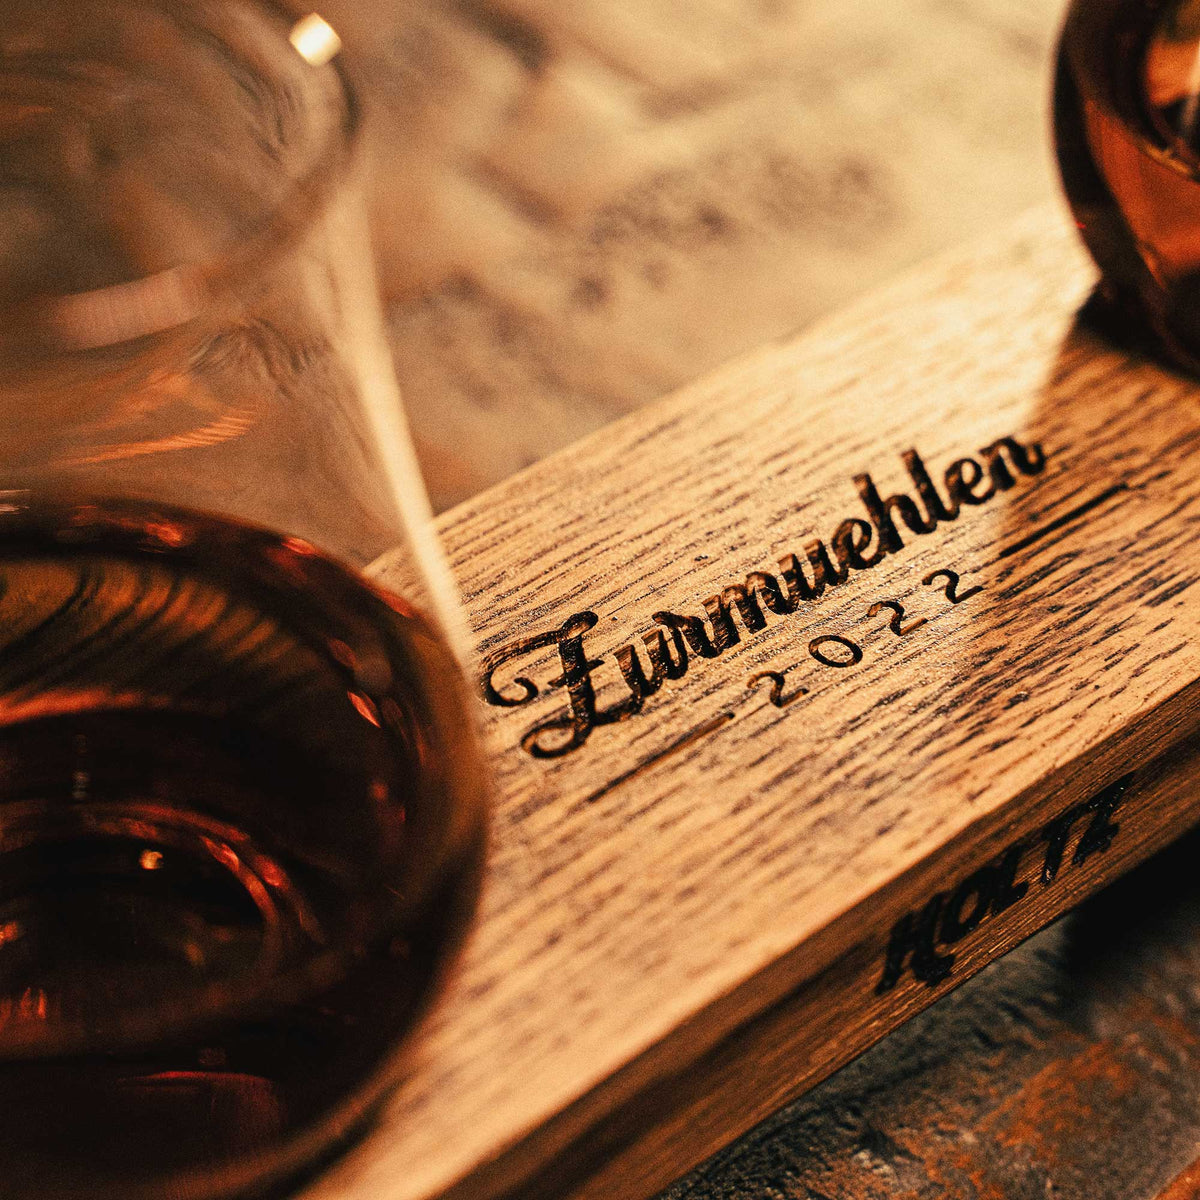 Personalized Whiskey Flight from Tennessee Whiskey Barrel Stave Barware